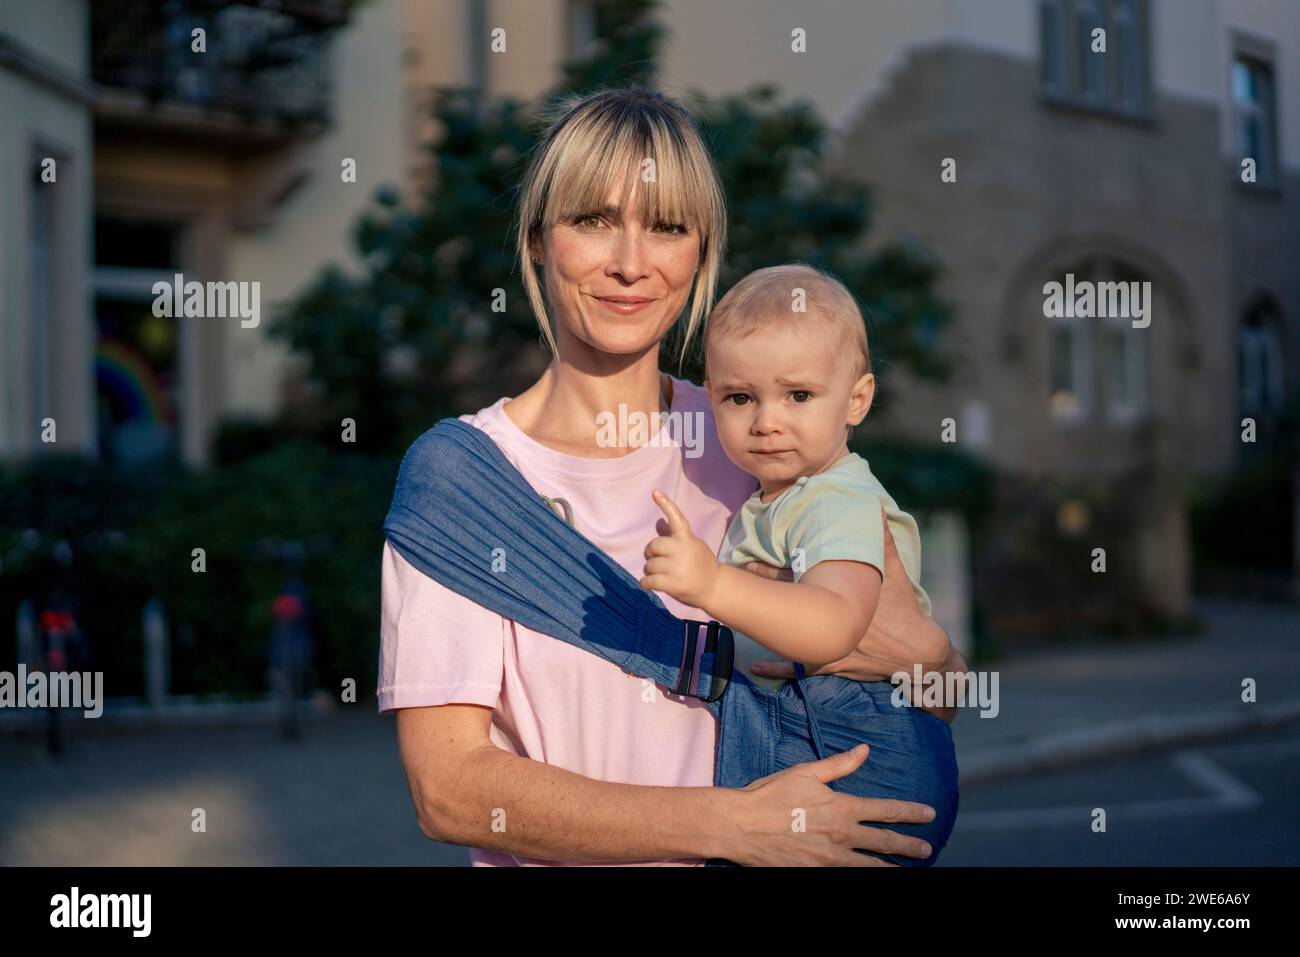 Smiling woman carrying son in baby sling Stock Photo